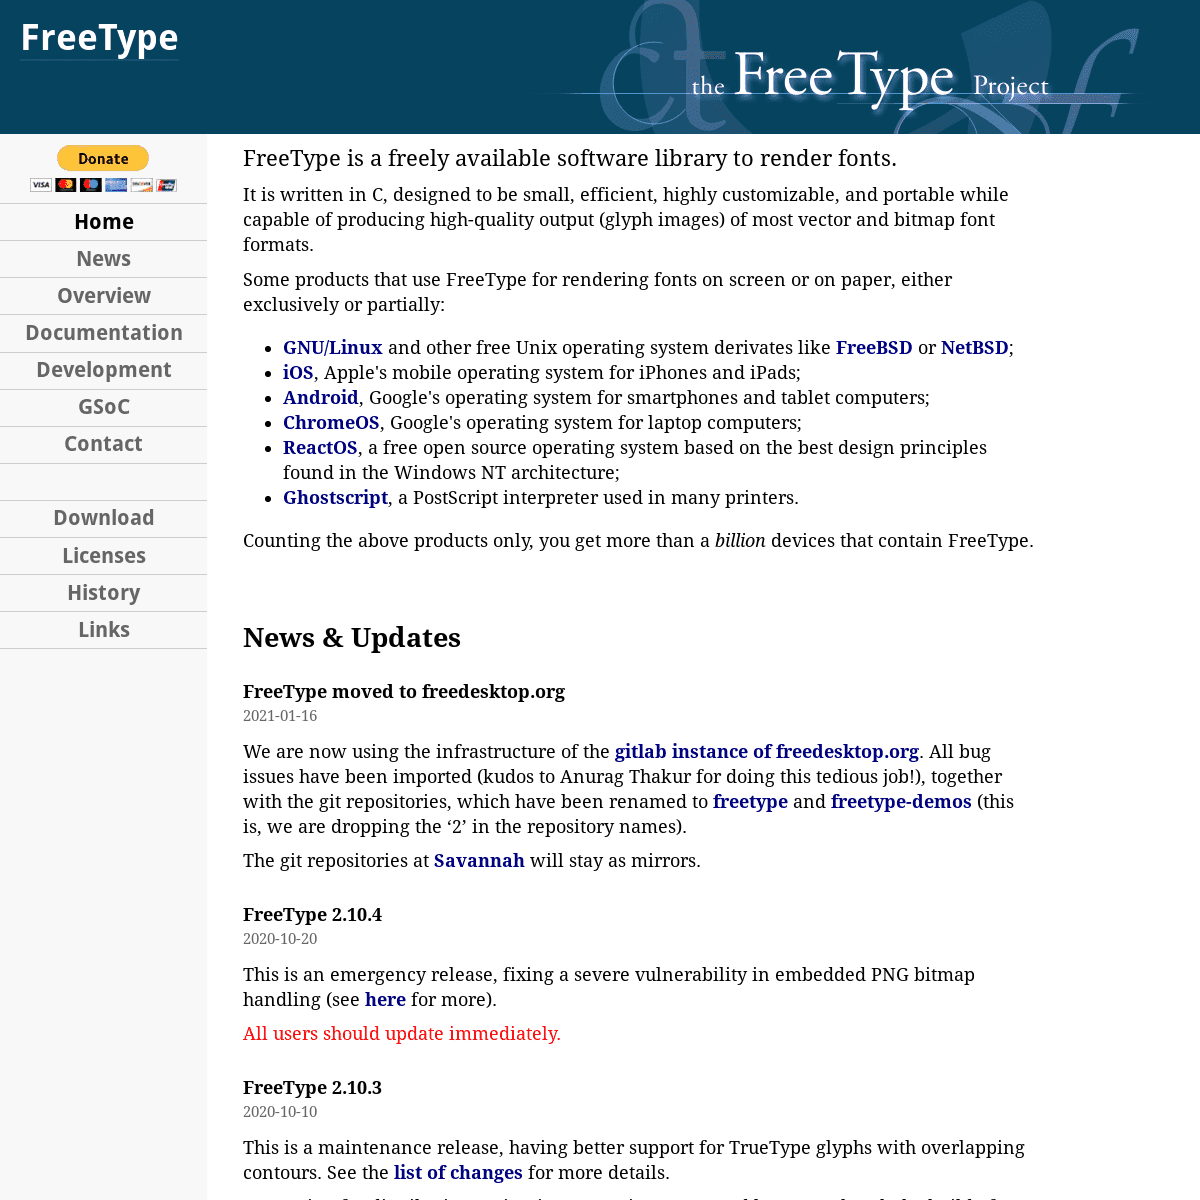 A complete backup of https://freetype.org